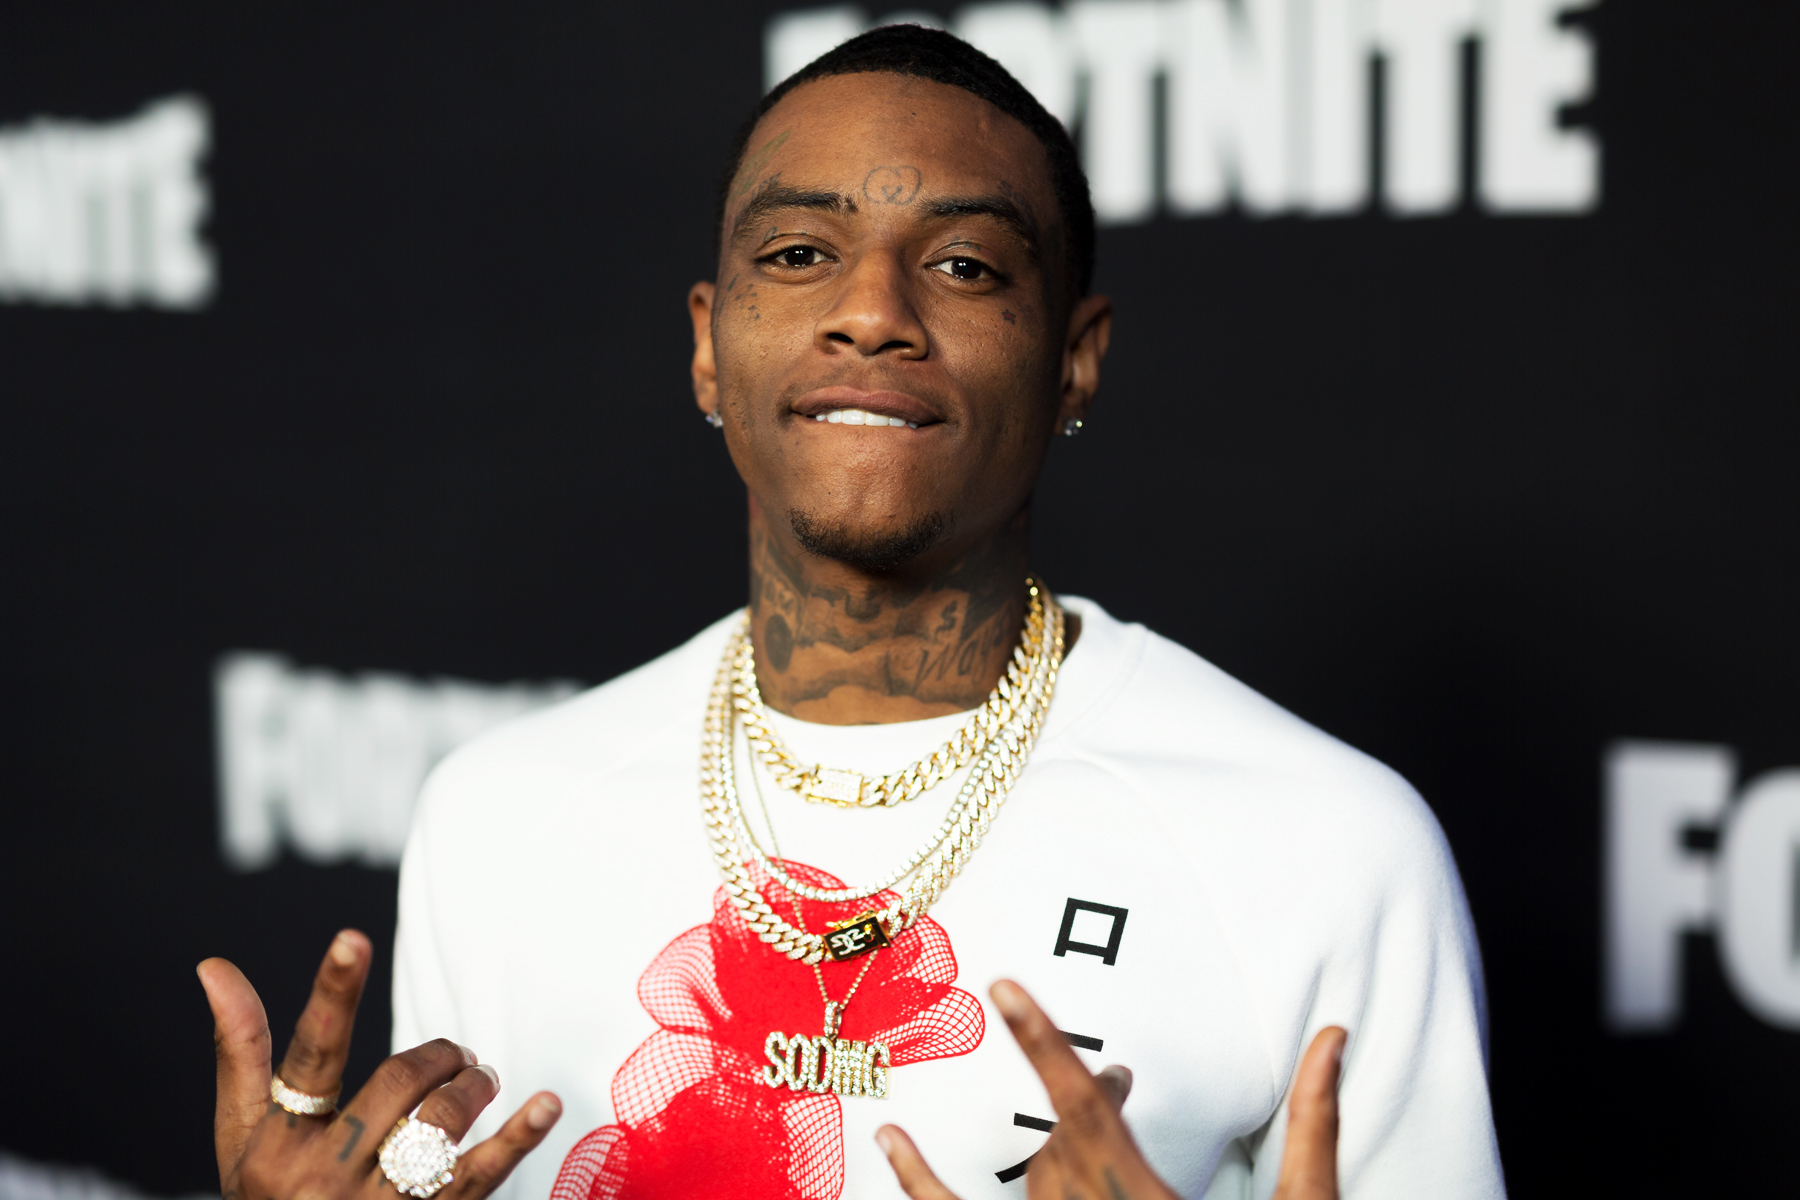 Soulja Boy Apparently Has An Idea For McDonalds That's Worth $1B